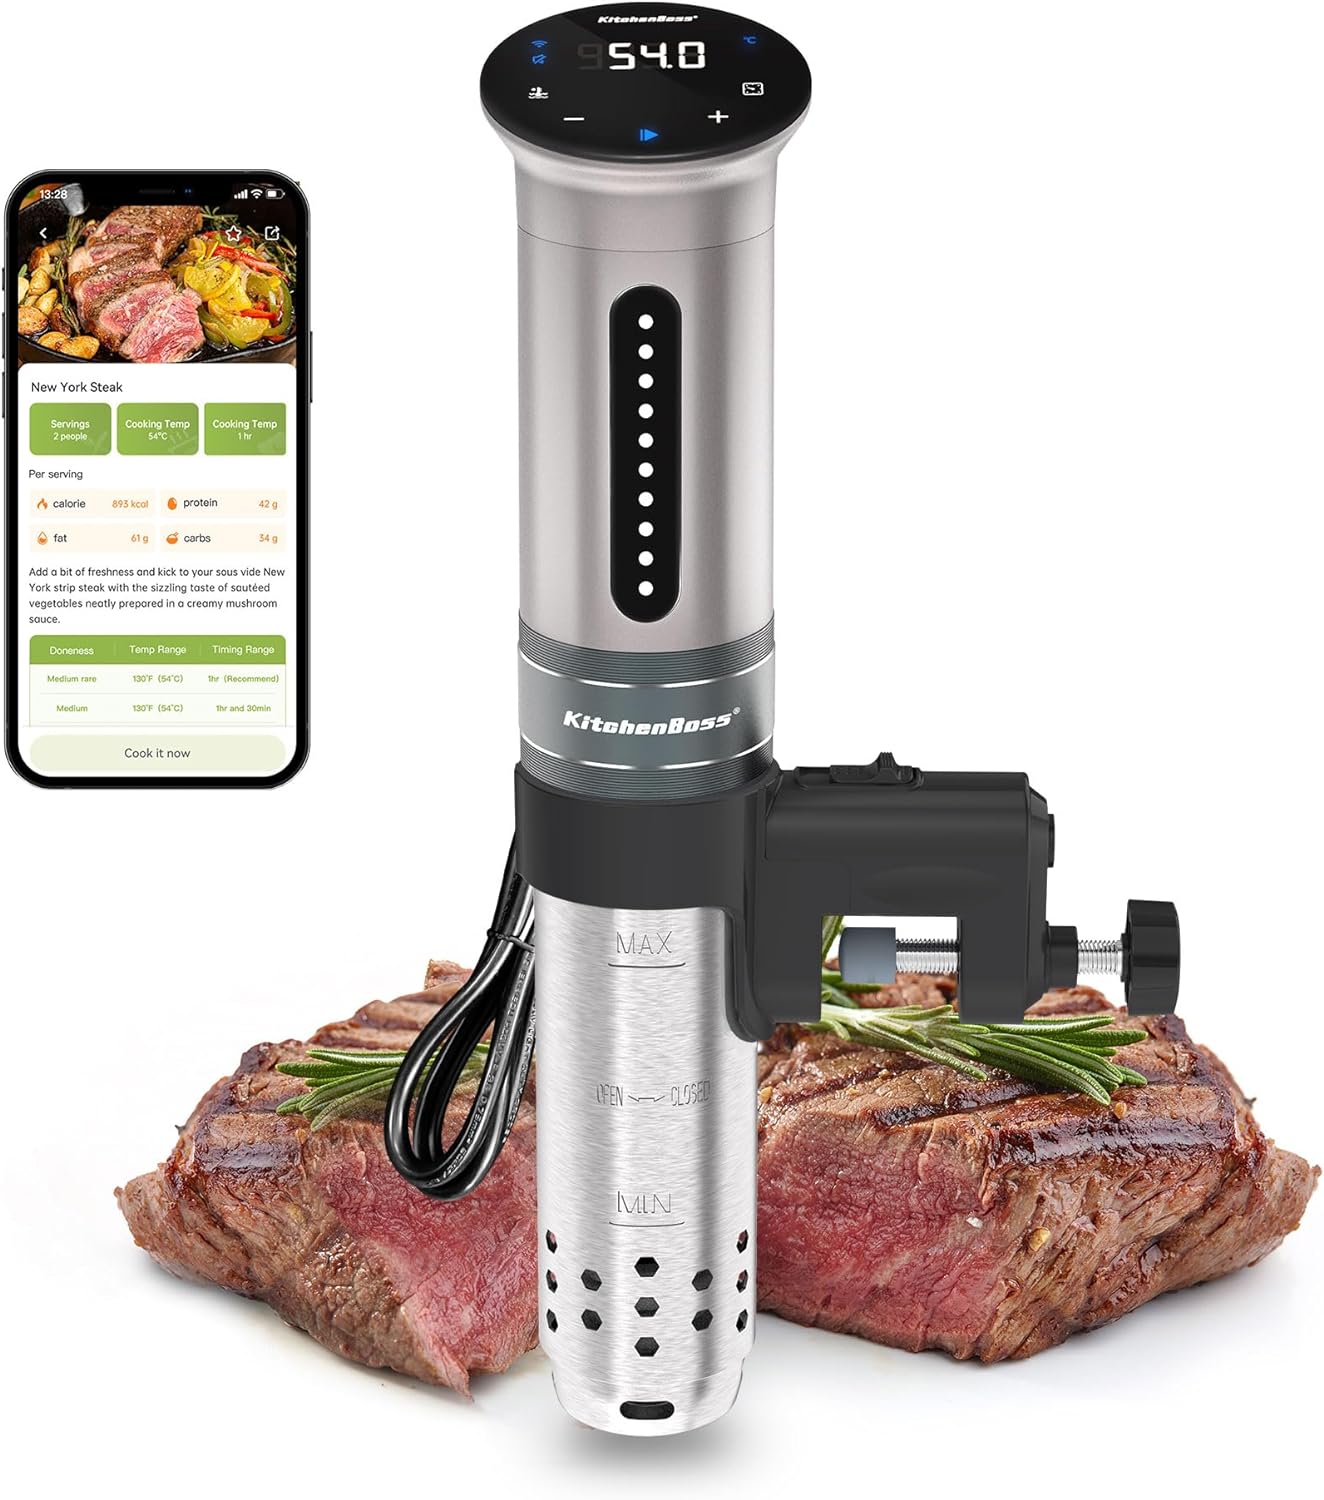 KitchenBoss Sous Vide Stick Cooker: 1100W Precision Cooker Wi-Fi Sous Vide Stick App Control Sous Vide Rod Circulation 40℃-90℃ IPX7 Waterproof LED Touch Display Ultra Quiet Diving Circulator
